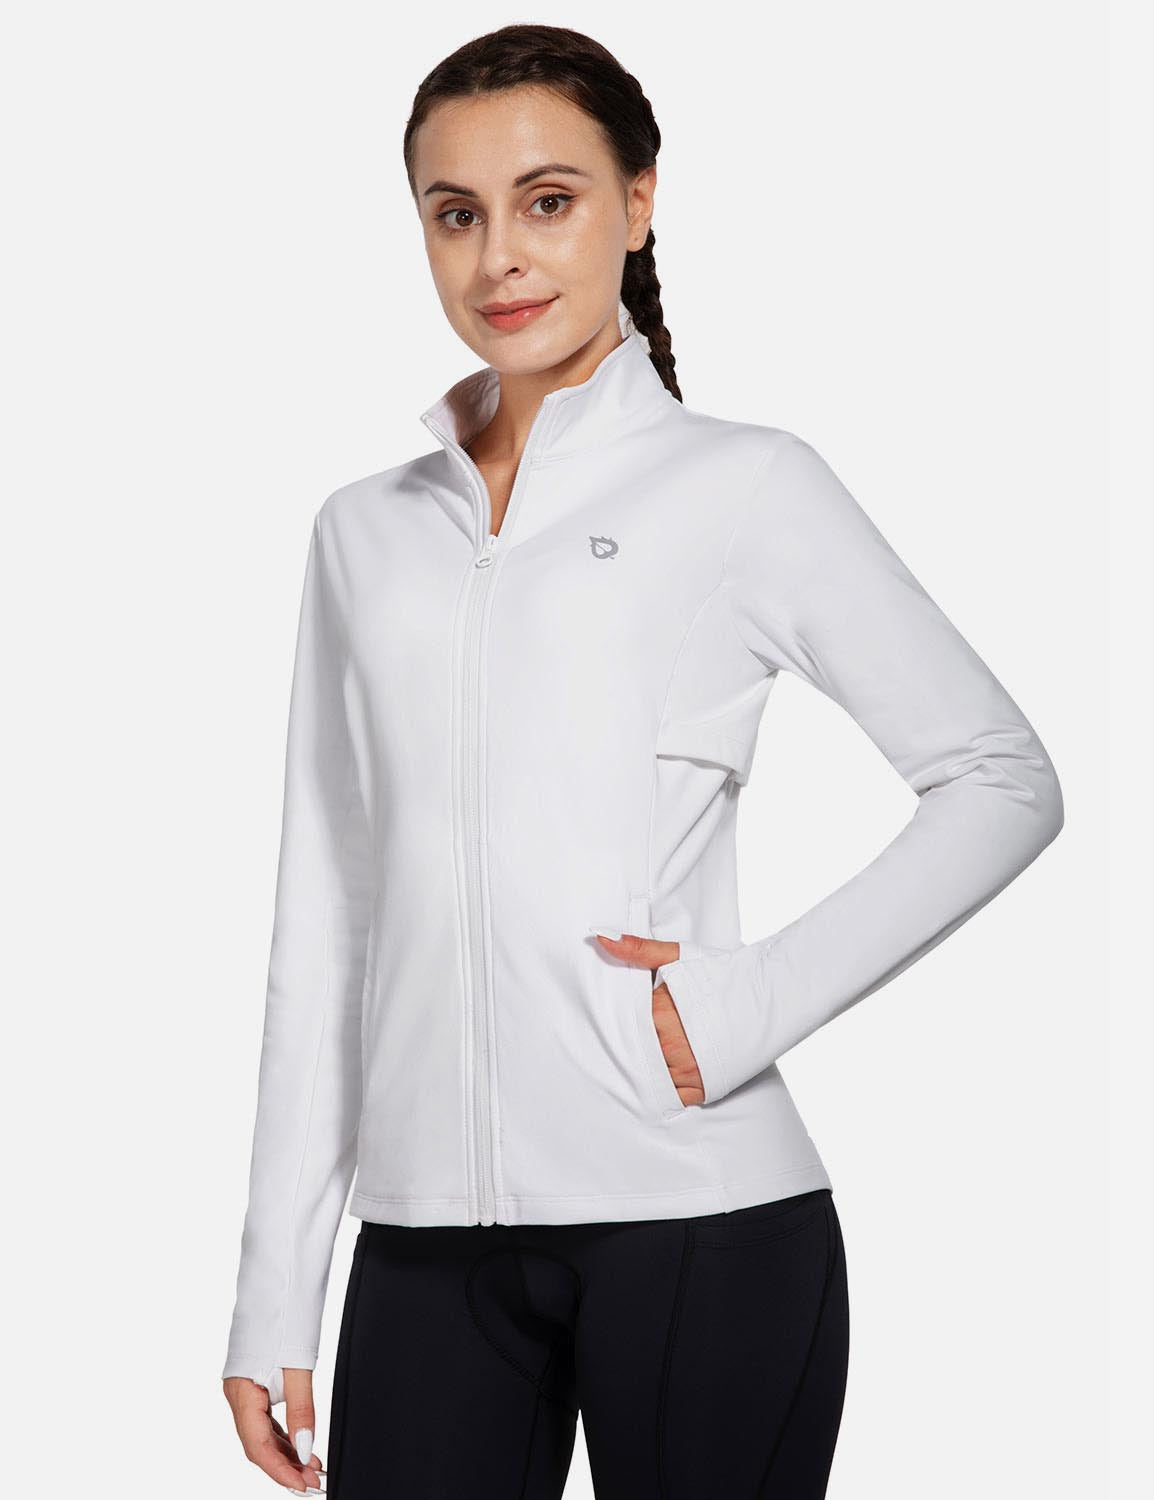 Baleaf Women's Laureate Thermal Water-Resistant Jacket cai039 Lucent White Front